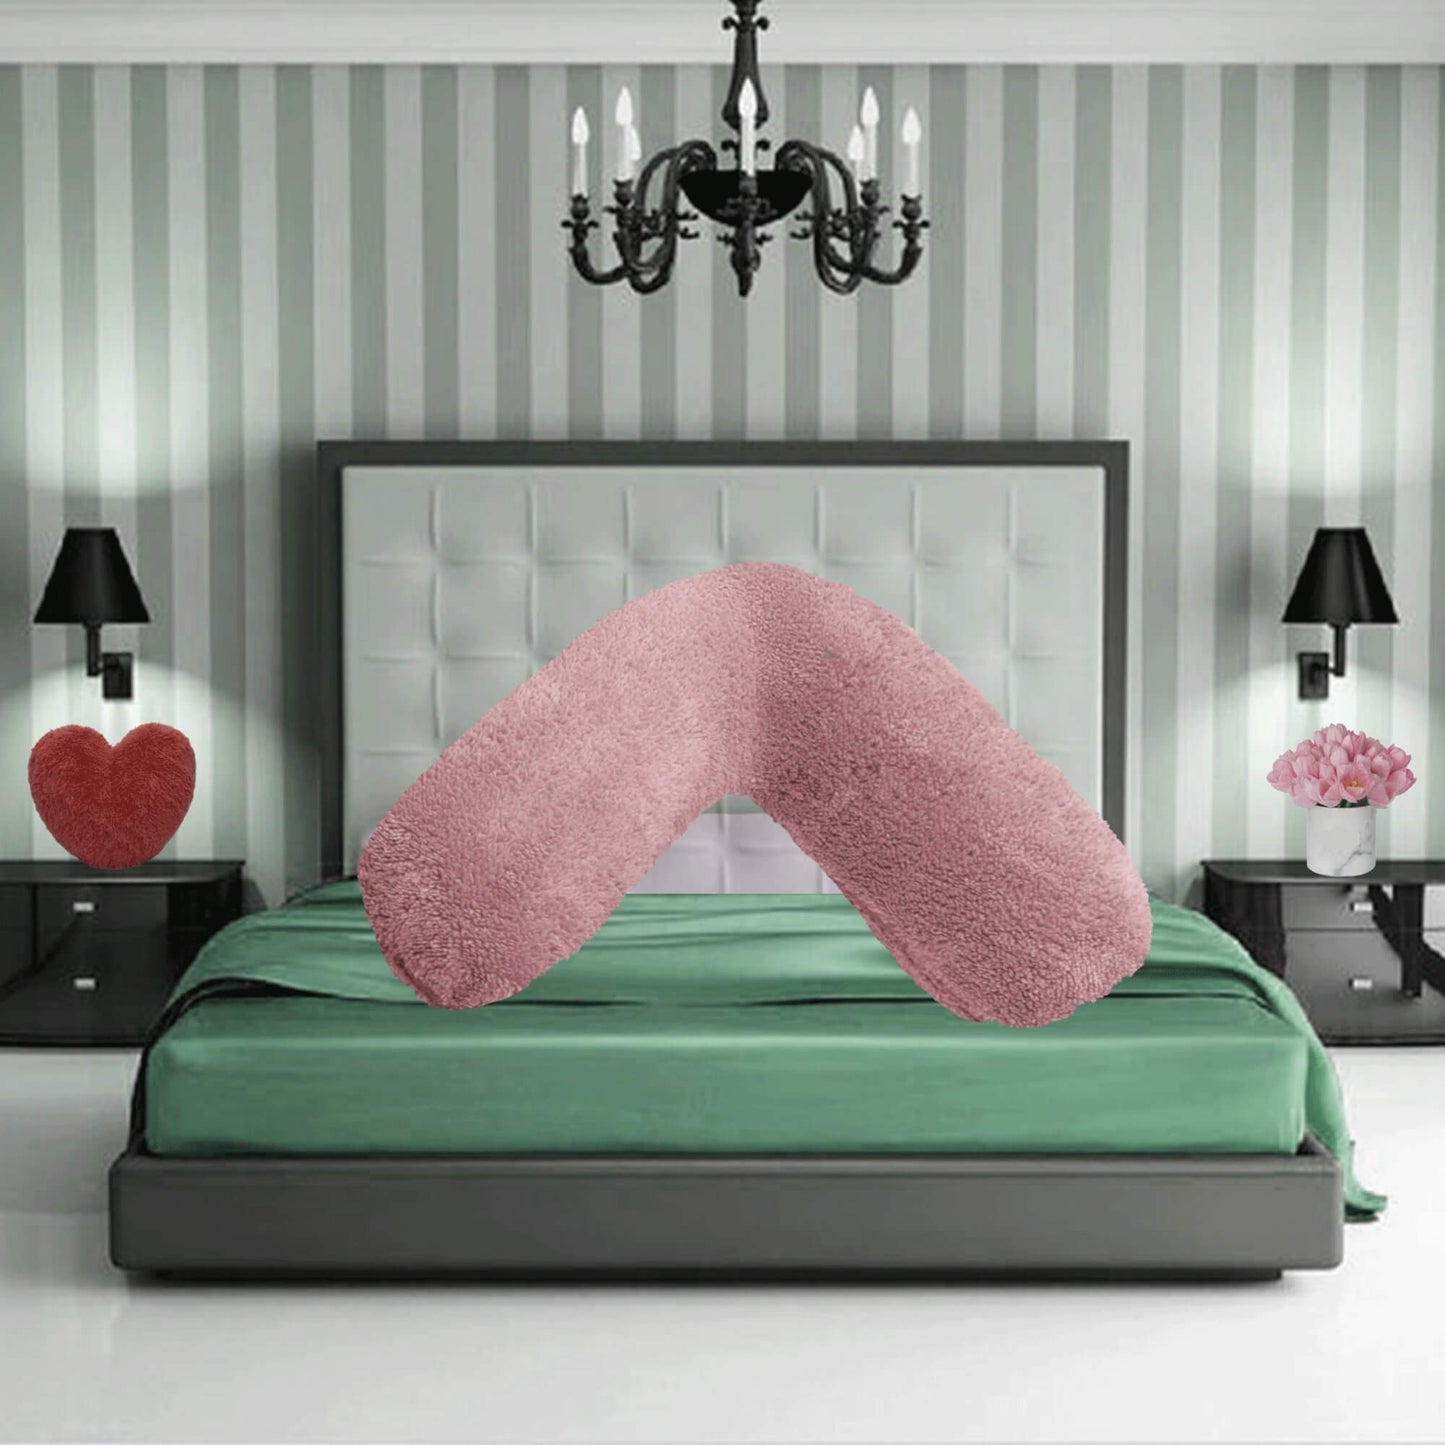 V Shaped Teddy Pillowcase Pregnancy Maternity Cover Only - TheComfortshop.co.ukPillow Case10721718956379thecomfortshopTheComfortshop.co.ukTeddy V Cover Blush OnlyBlushV Shaped Teddy Pillowcase Pregnancy Maternity Cover Only - TheComfortshop.co.uk